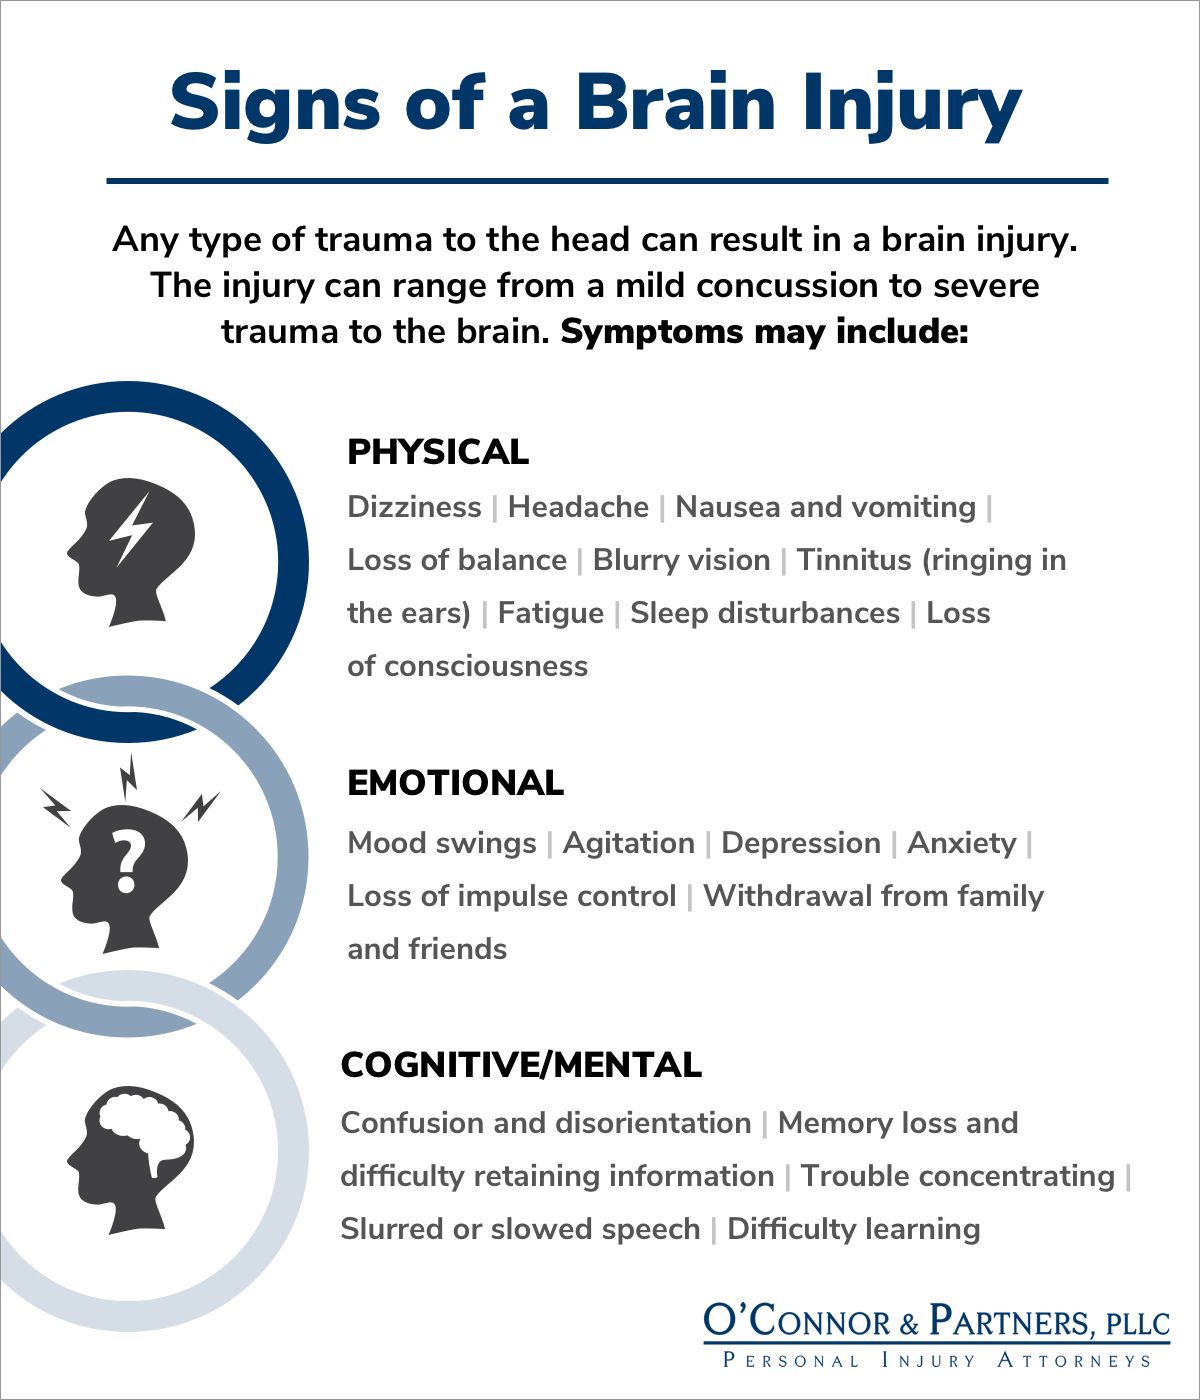 Signs of a Brain Injury